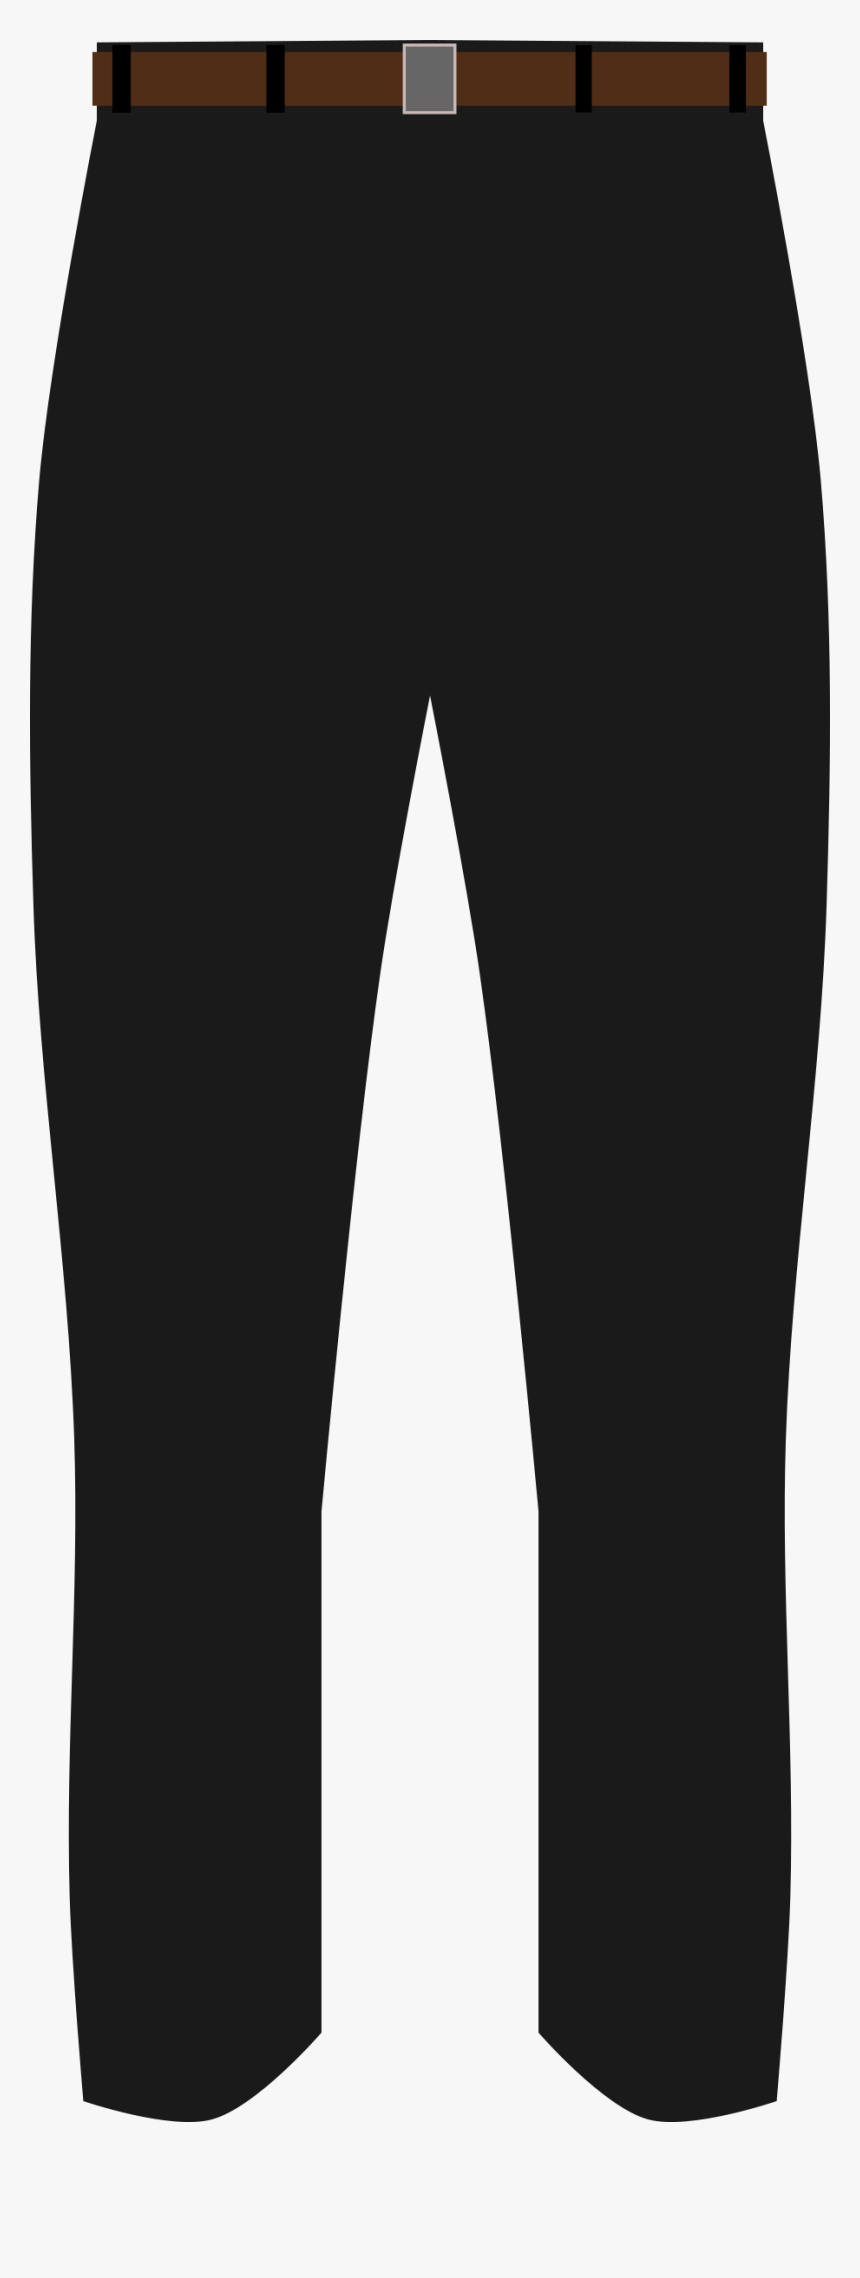 This Free Icons Png Design Of Black Pants- - Black Pants Clipart ...